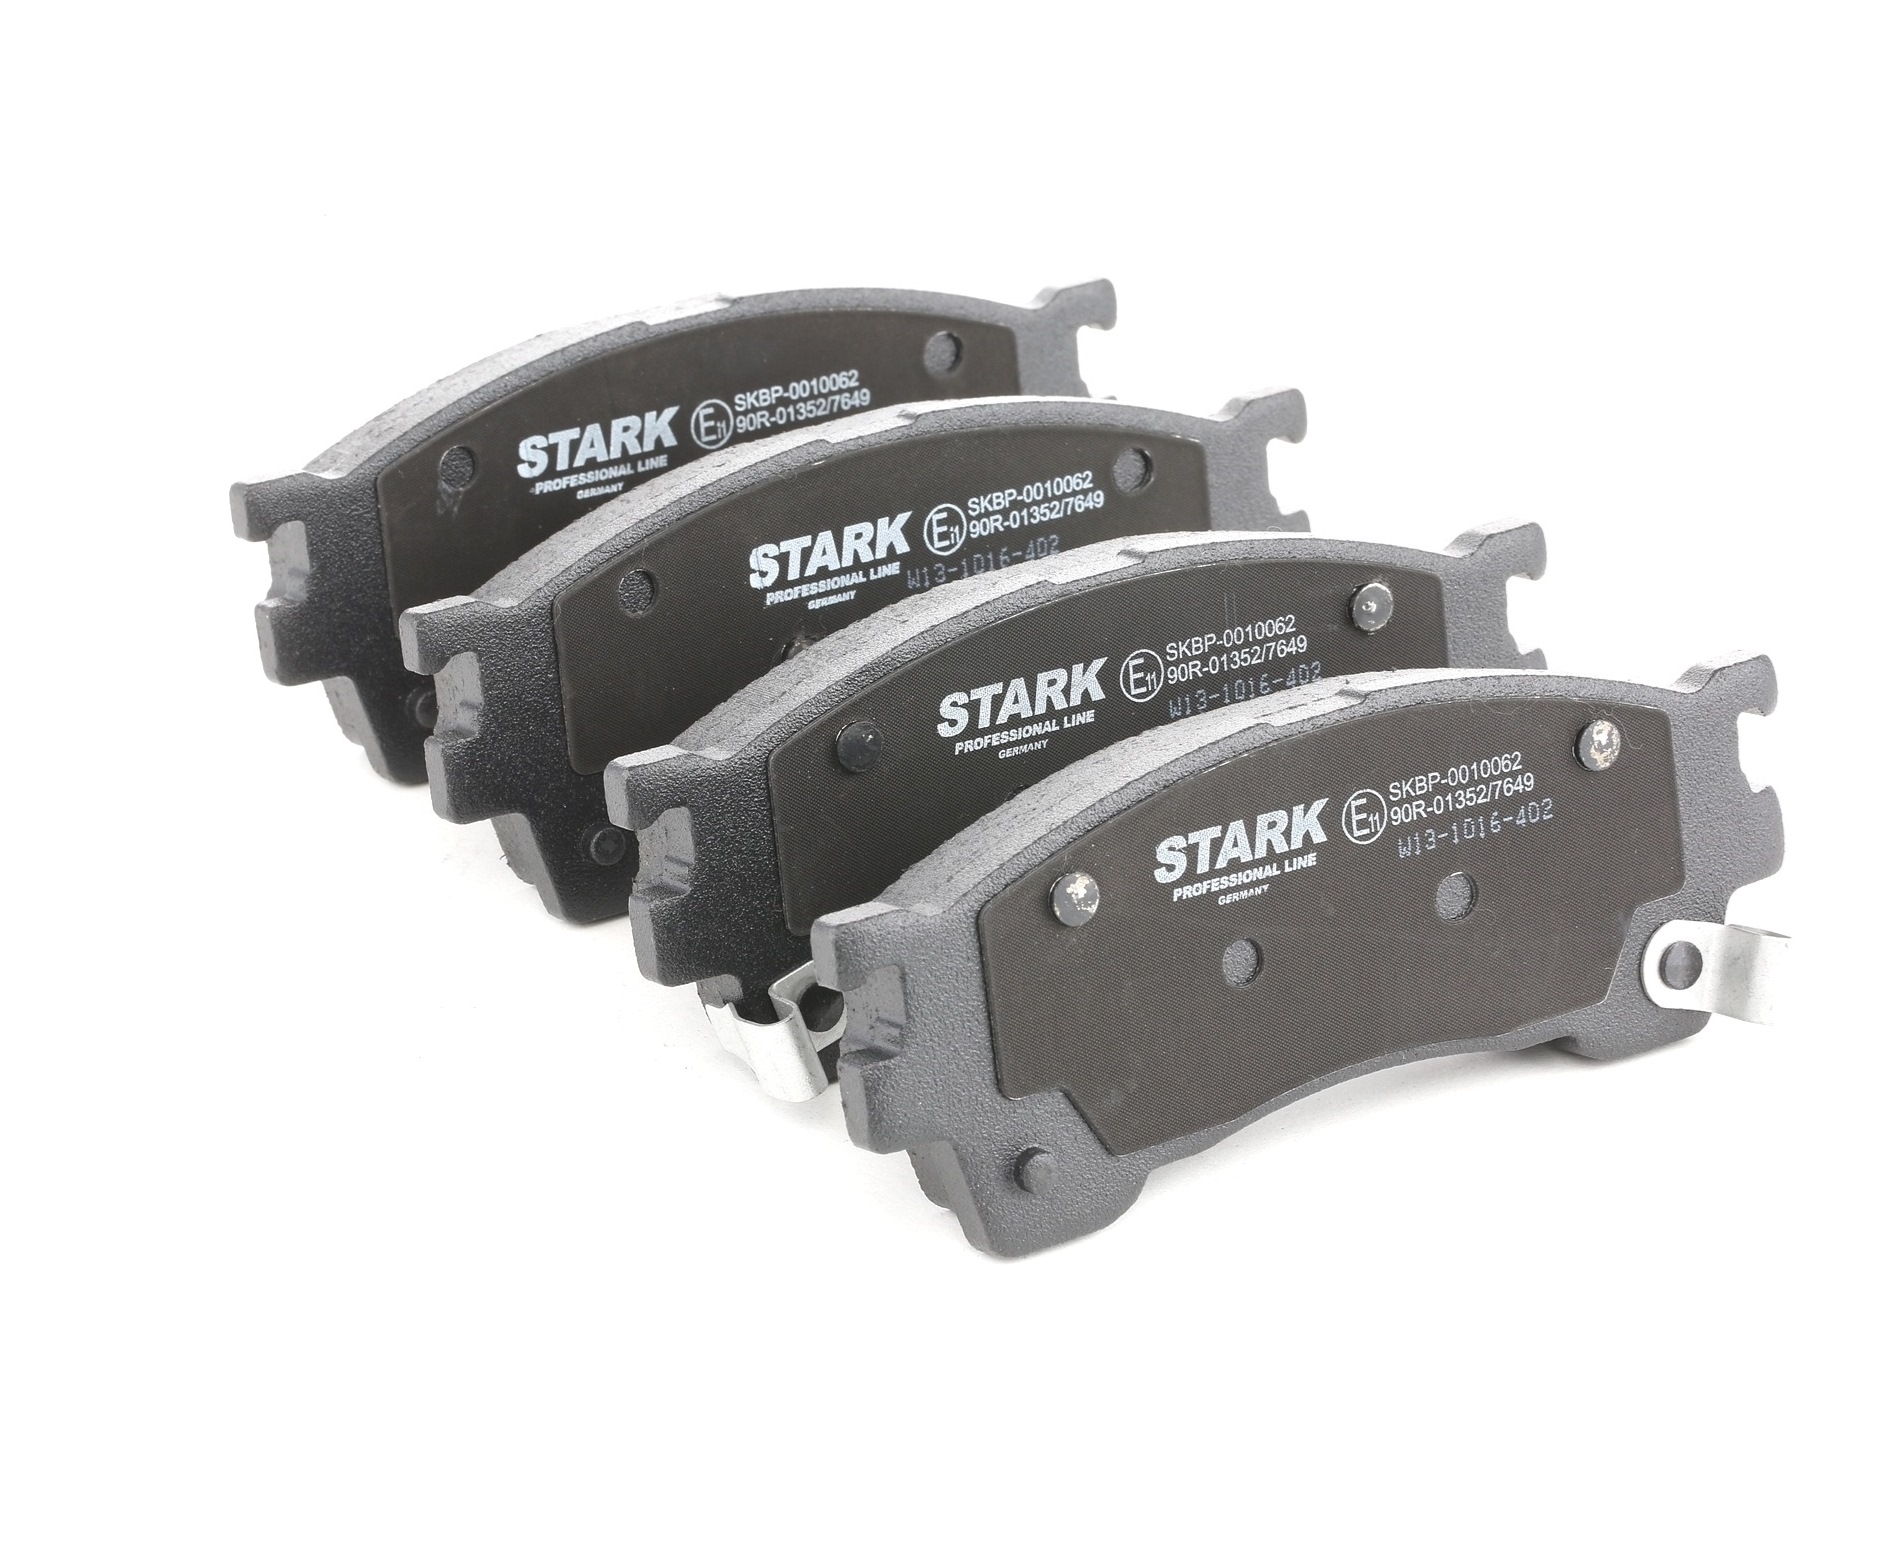 STARK SKBP-0010062 Brake pad set Front Axle, incl. wear warning contact, with acoustic wear warning